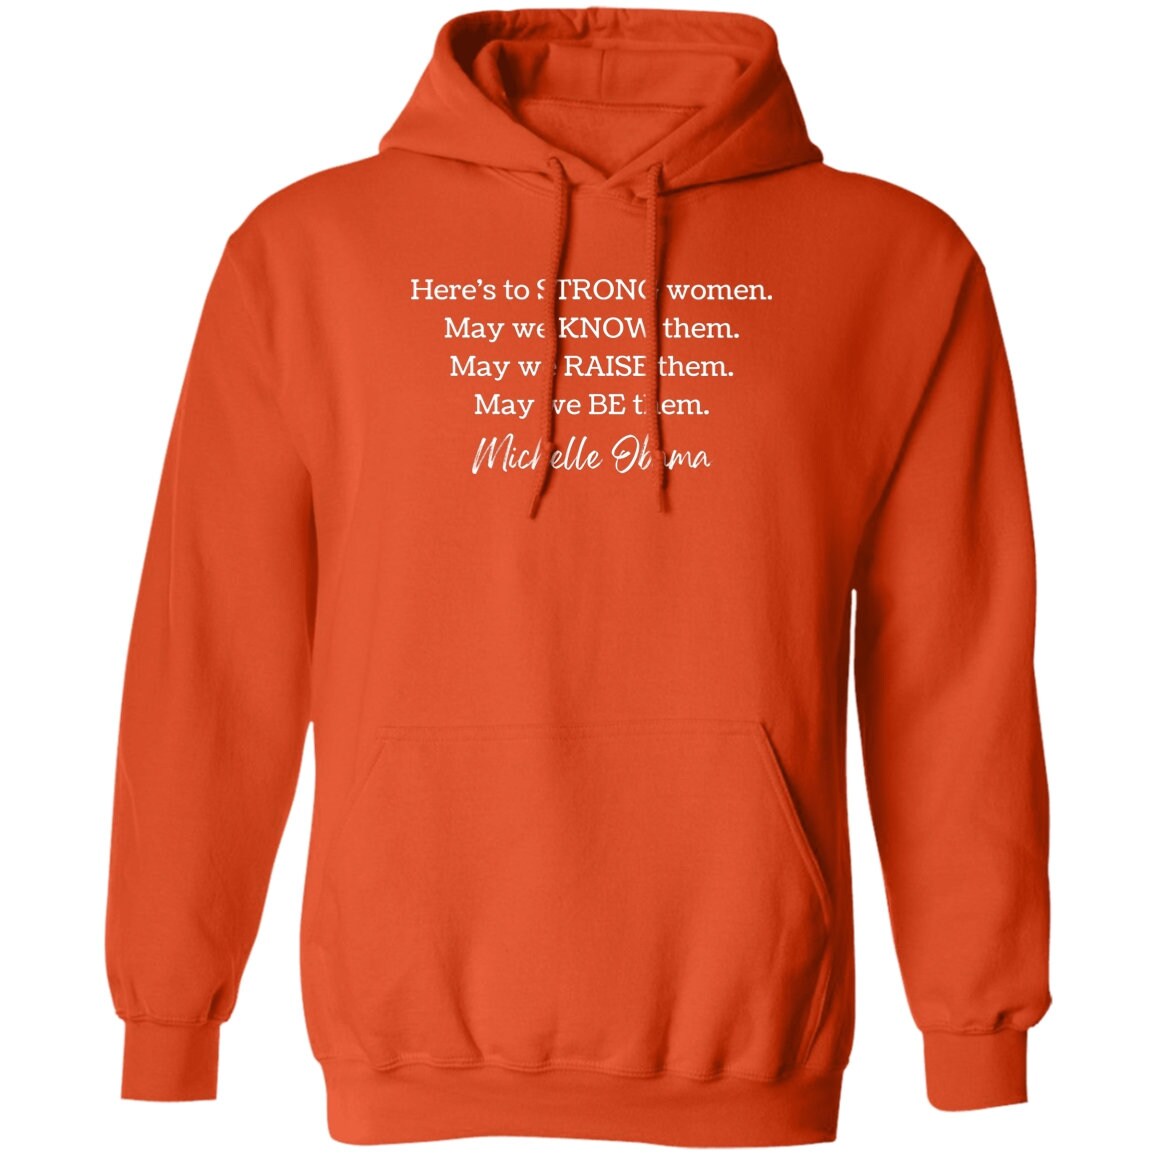 Michelle Obama Here's To Strong Women Quote Feminist Hoodie